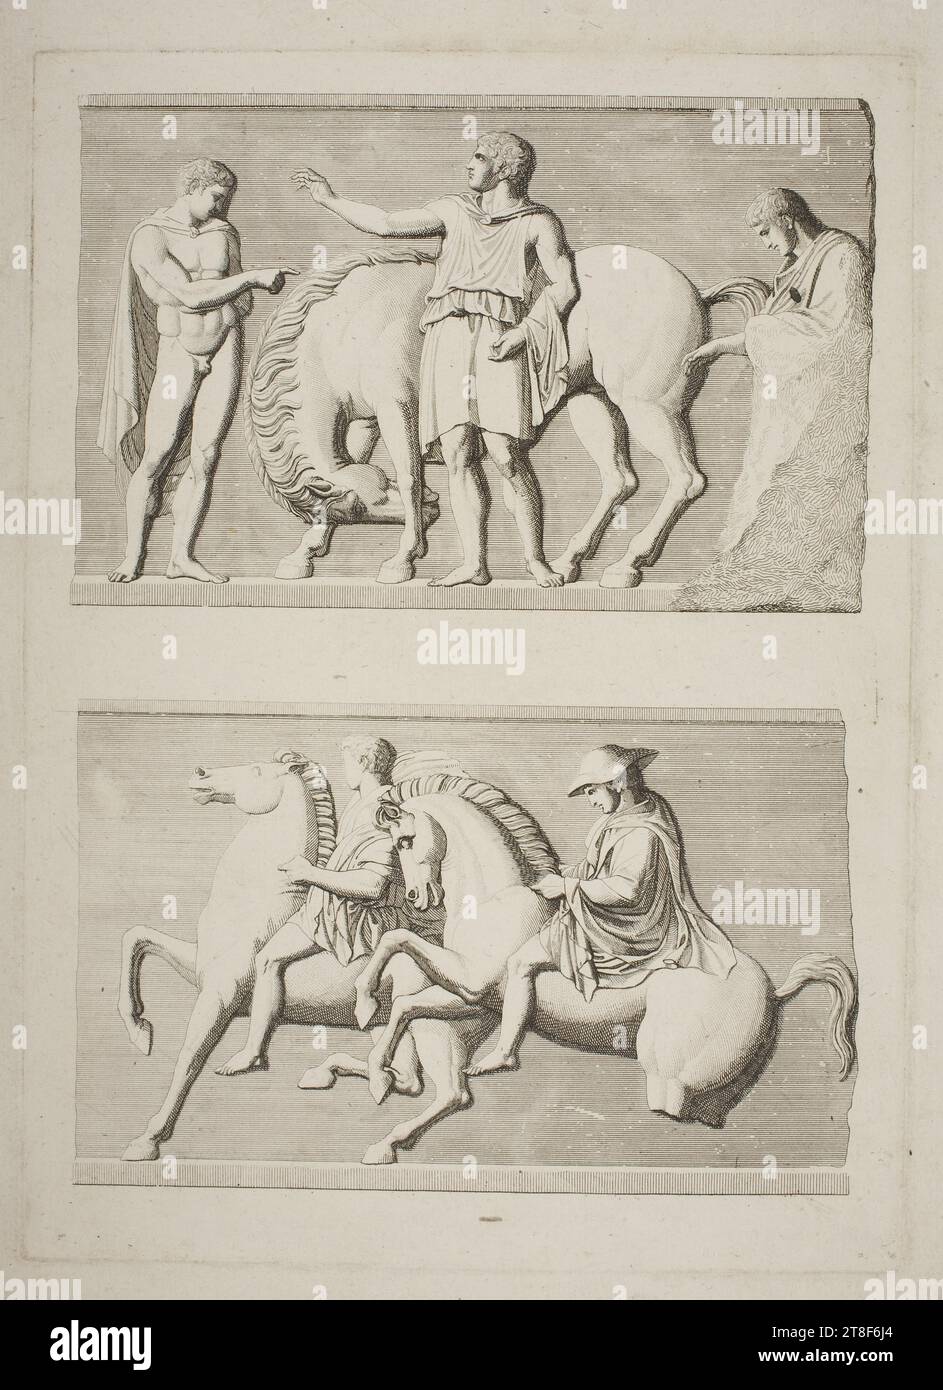 Three men by a horse. Riders, No later than 1900, Graphic Art, Copper Engraving, Paper, Color, Printer's ink, Copper engraving, Printet, Height (plate size) 295 mm, Height (paper size) 350 mm, Width (plate size) 212 mm, Width (paper size) 260 mm, Graphic Design, European Stock Photo